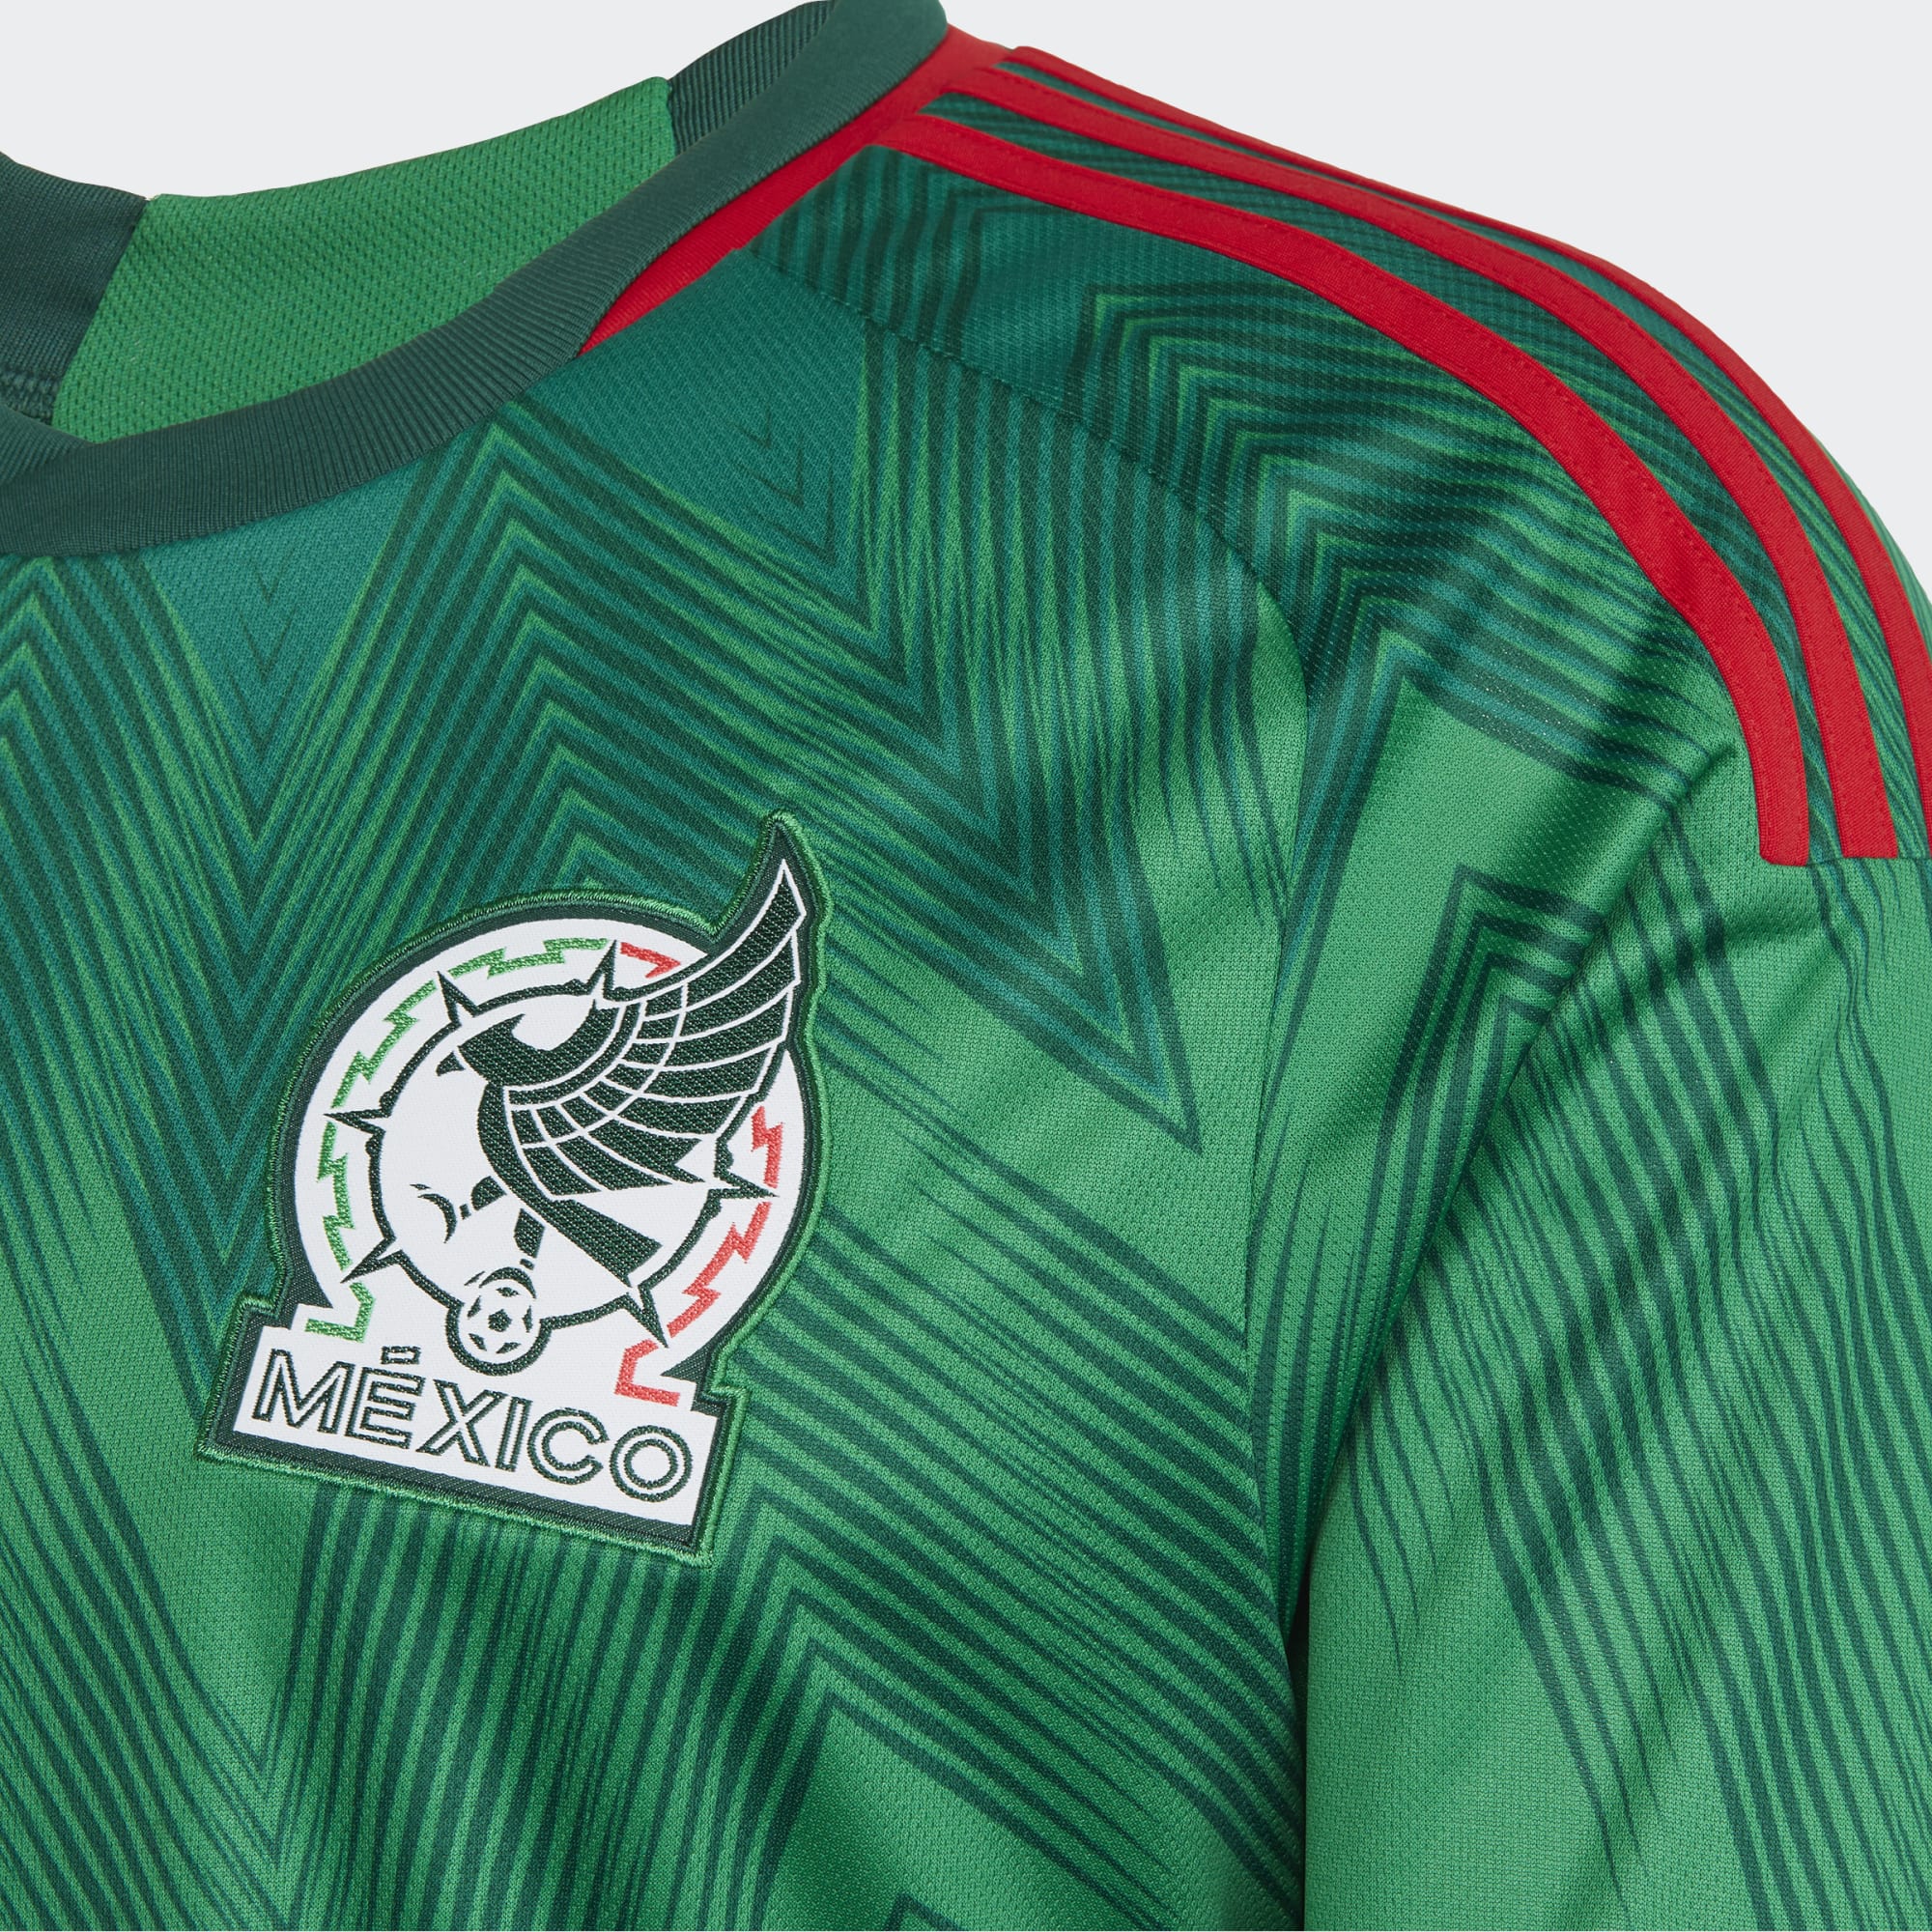 Adidas Mexico Chicharito Home Long Sleeve Jersey 22/23 w/ World Cup 2022 Patches (Vivid Green) Size XL